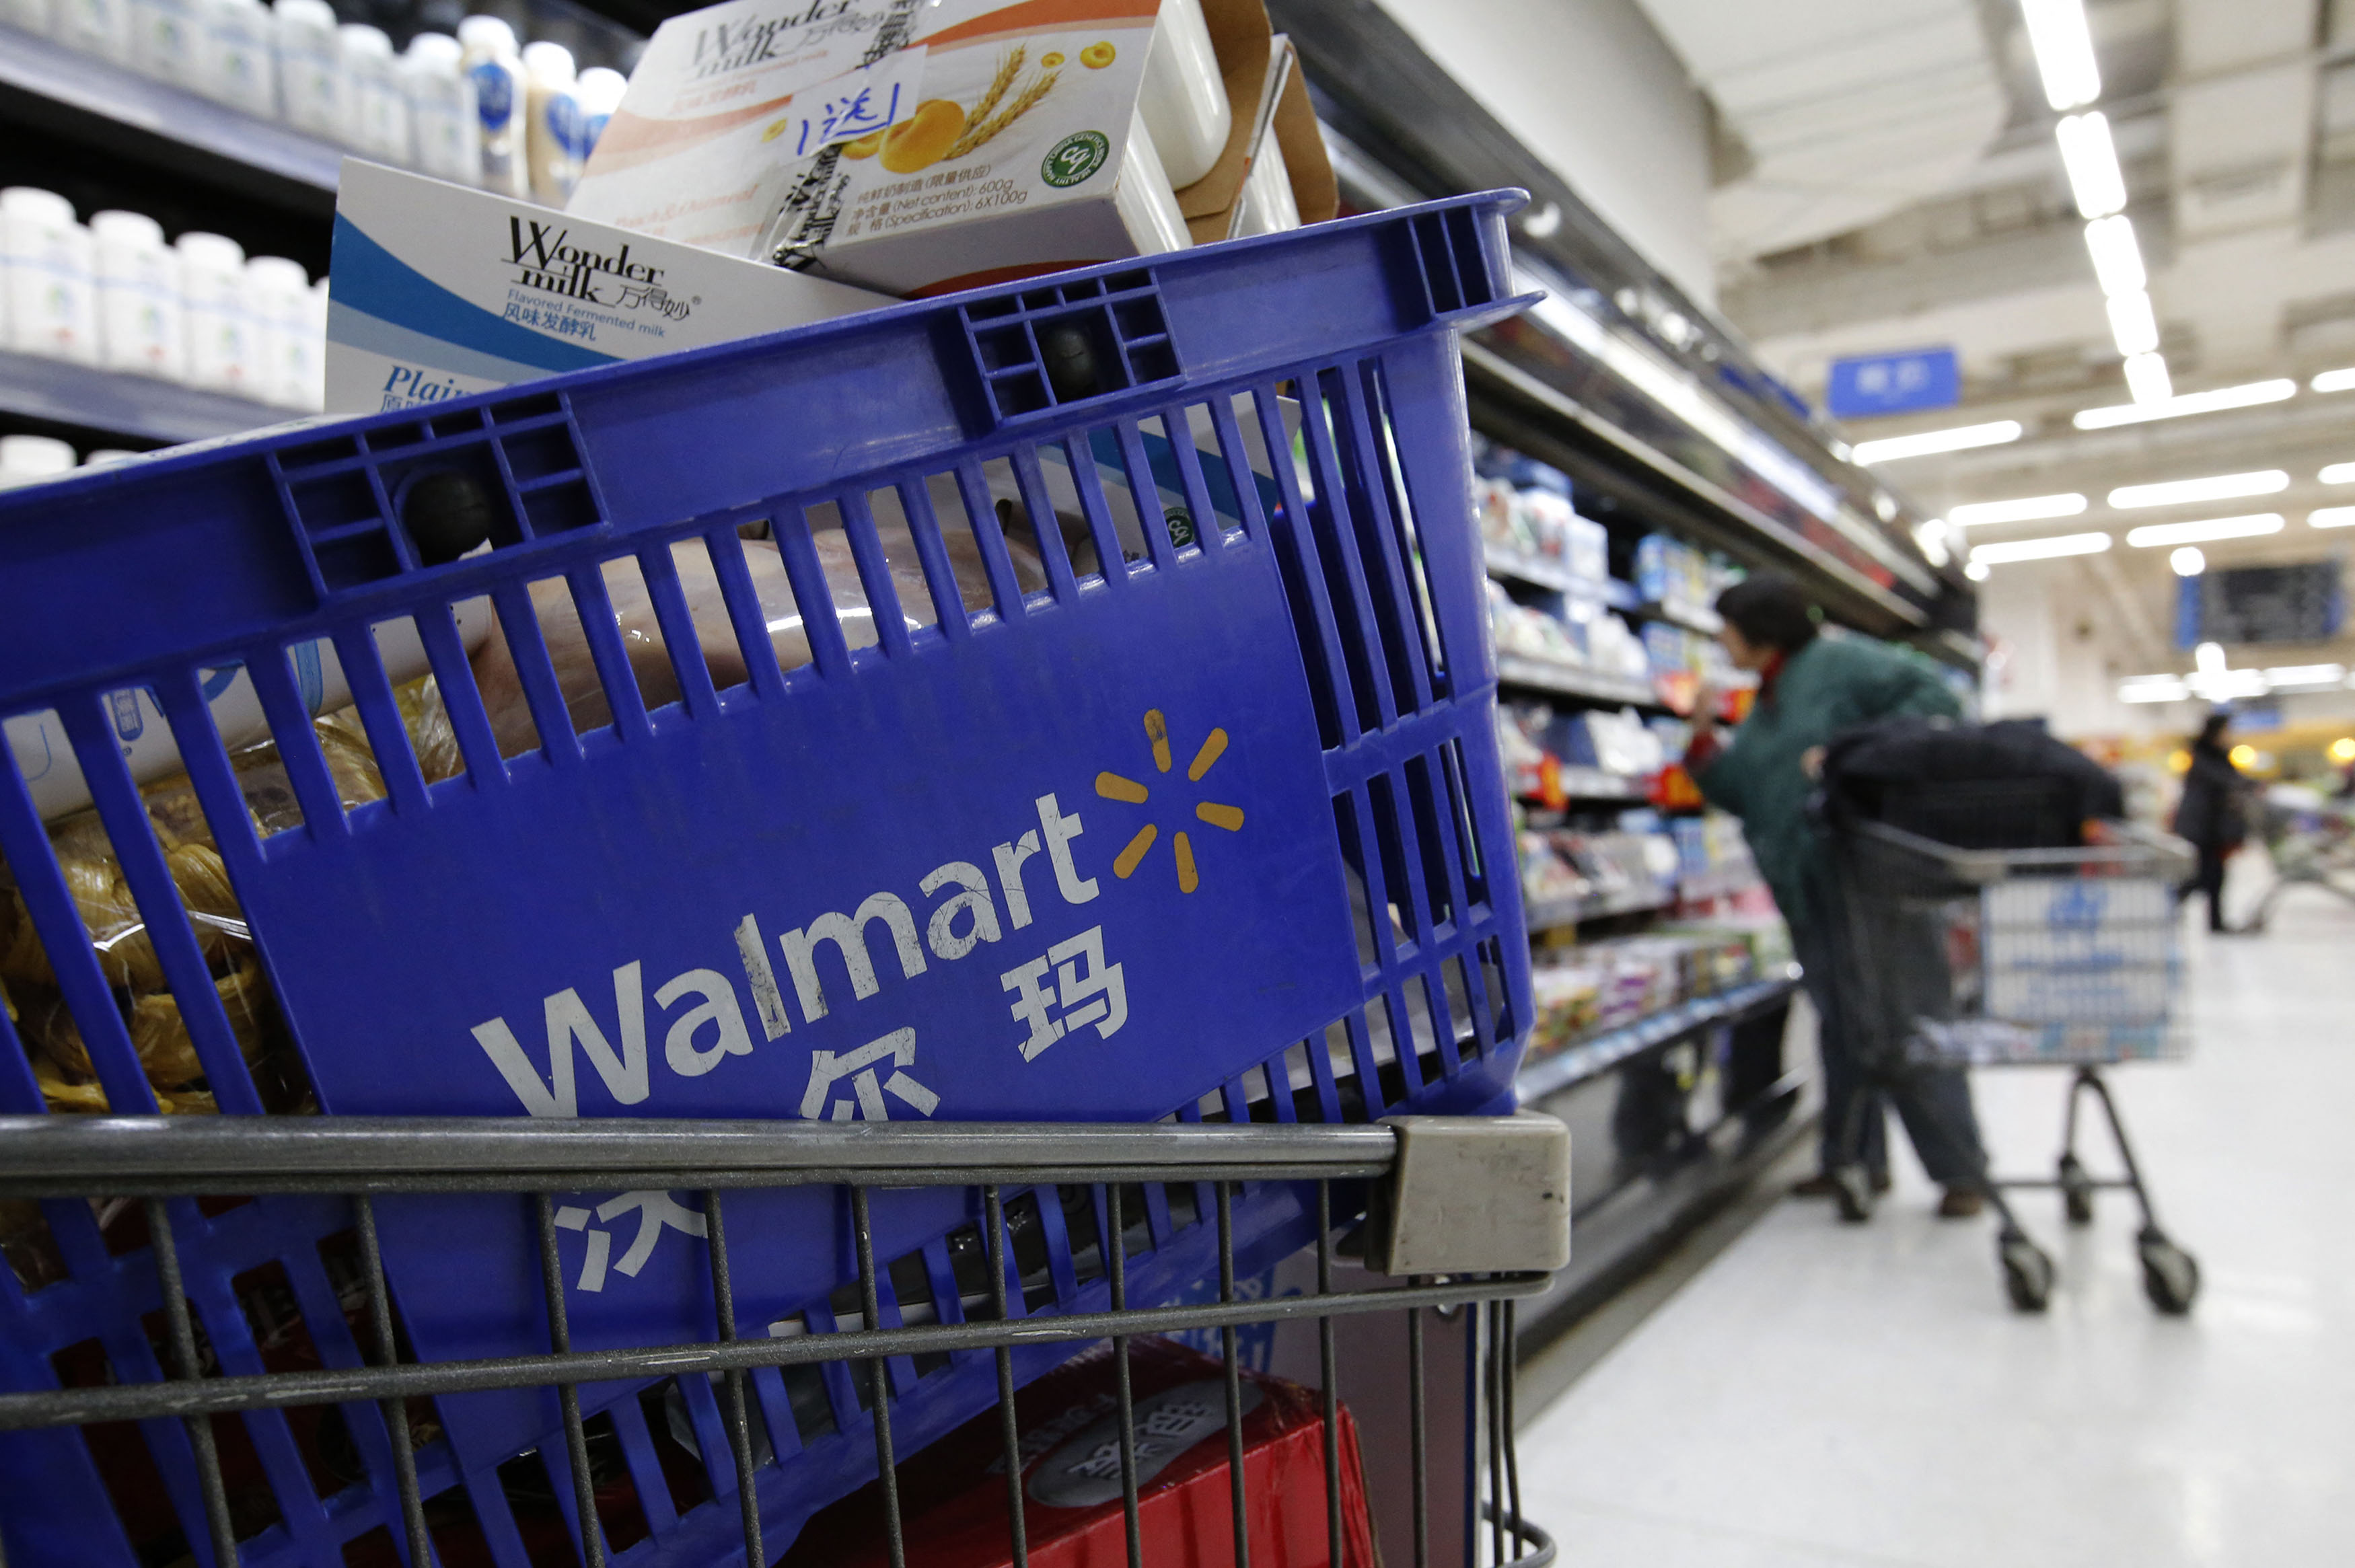 A shopping cart full of products is seen as a customer shops at a Wal-Mart store in Beijing